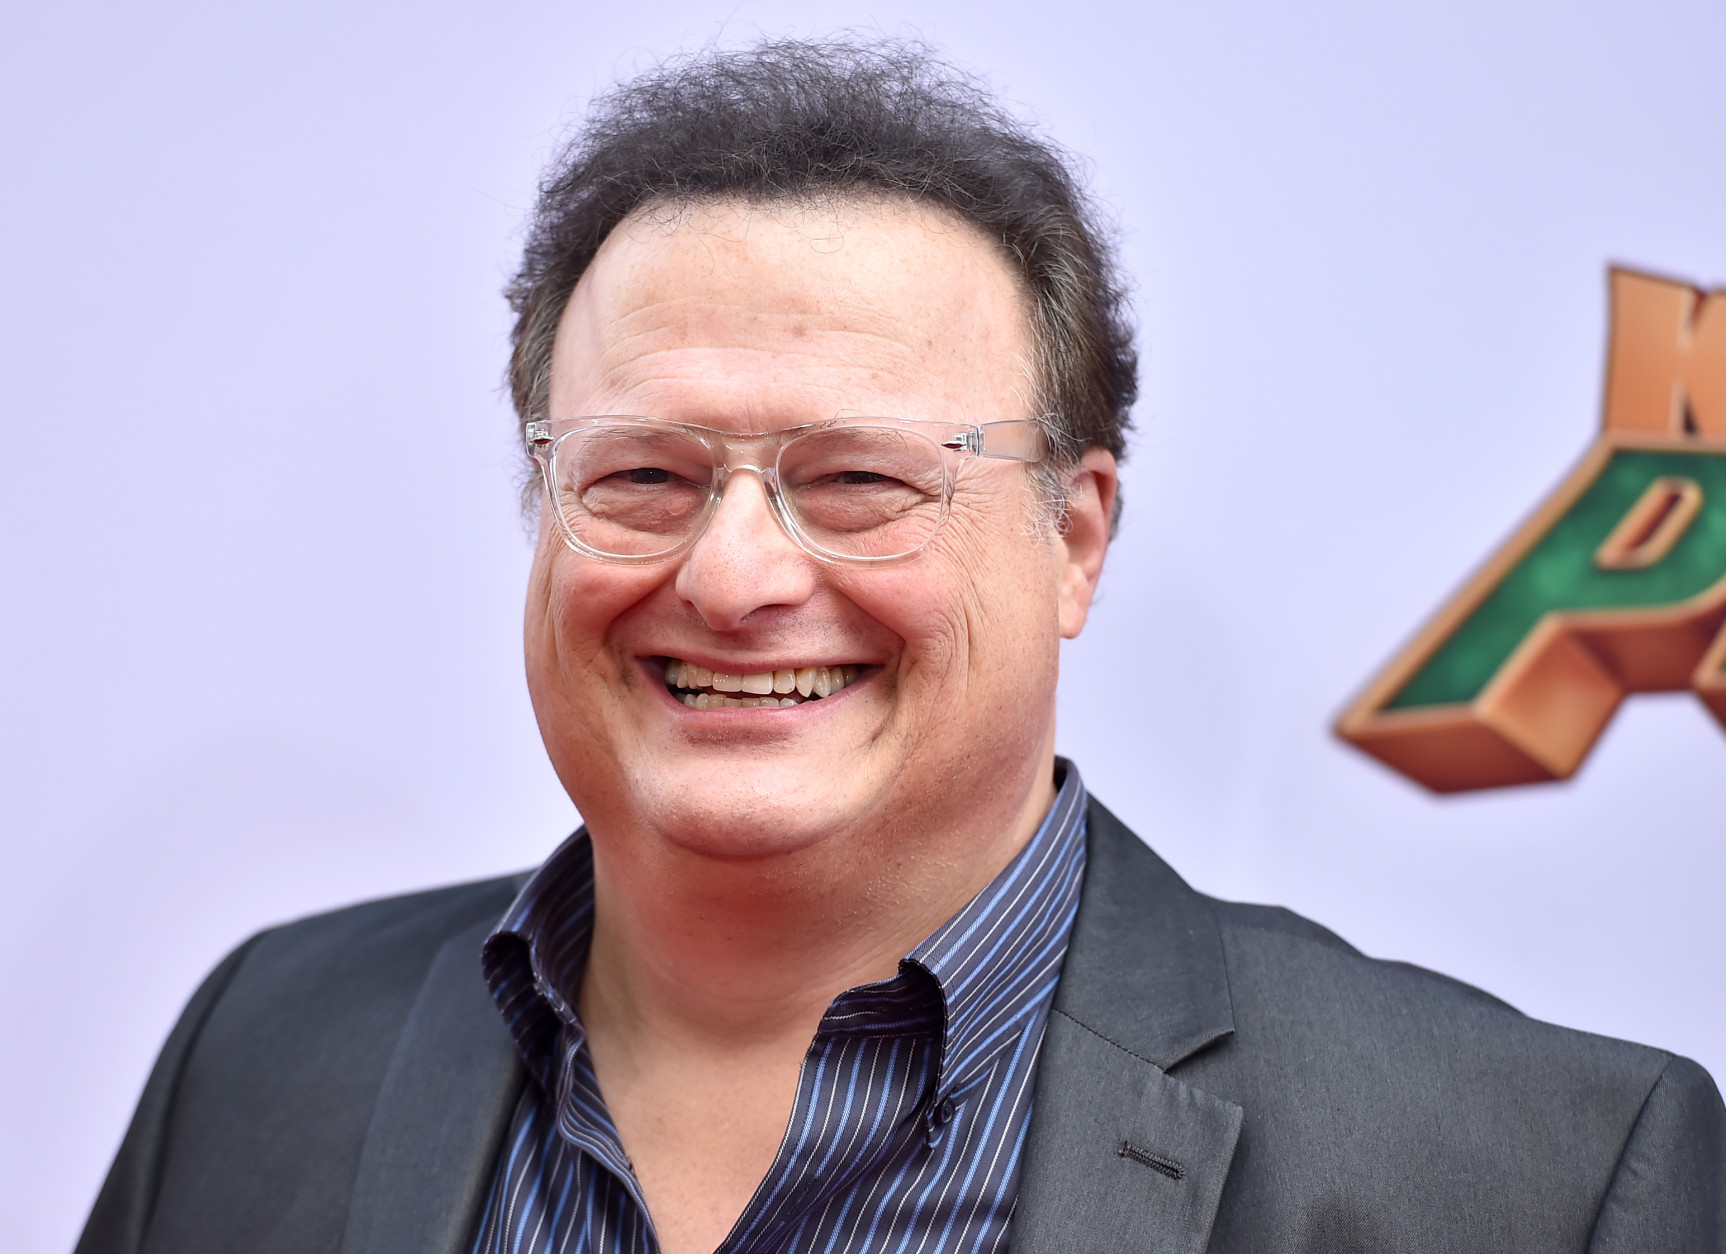 Wayne Knight arrives at the world premiere of "Kung Fu Panda 3" at the TCL Chinese Theatre on Saturday, Jan. 16, 2016, in Los Angeles. (Photo by Jordan Strauss/Invision/AP)